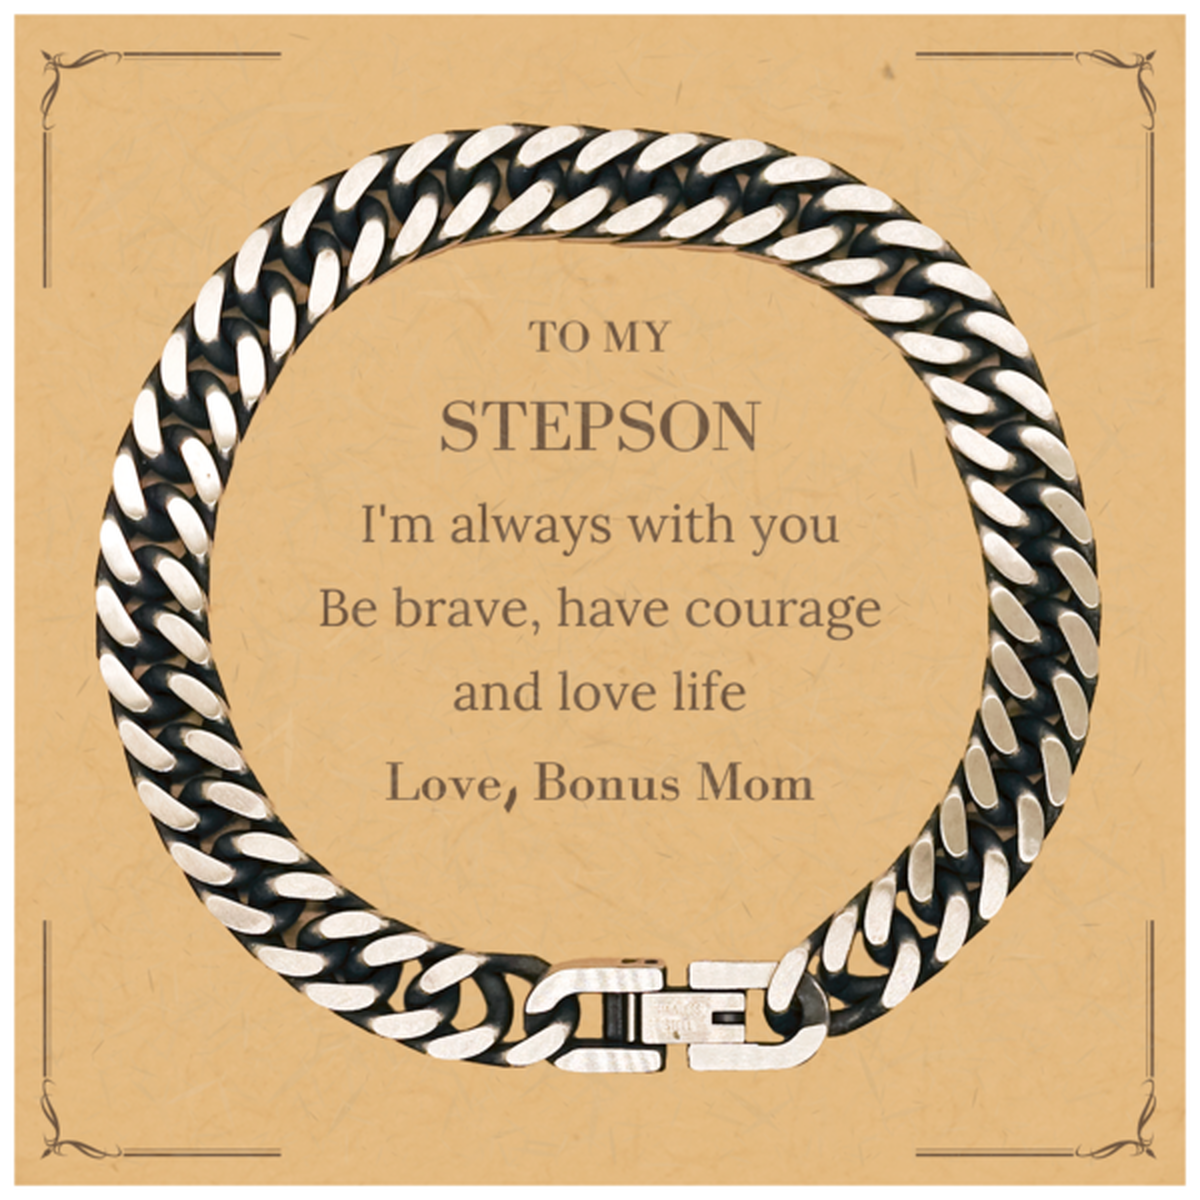 To My Stepson Gifts from Bonus Mom, Unique Cuban Link Chain Bracelet Inspirational Christmas Birthday Graduation Gifts for Stepson I'm always with you. Be brave, have courage and love life. Love, Bonus Mom